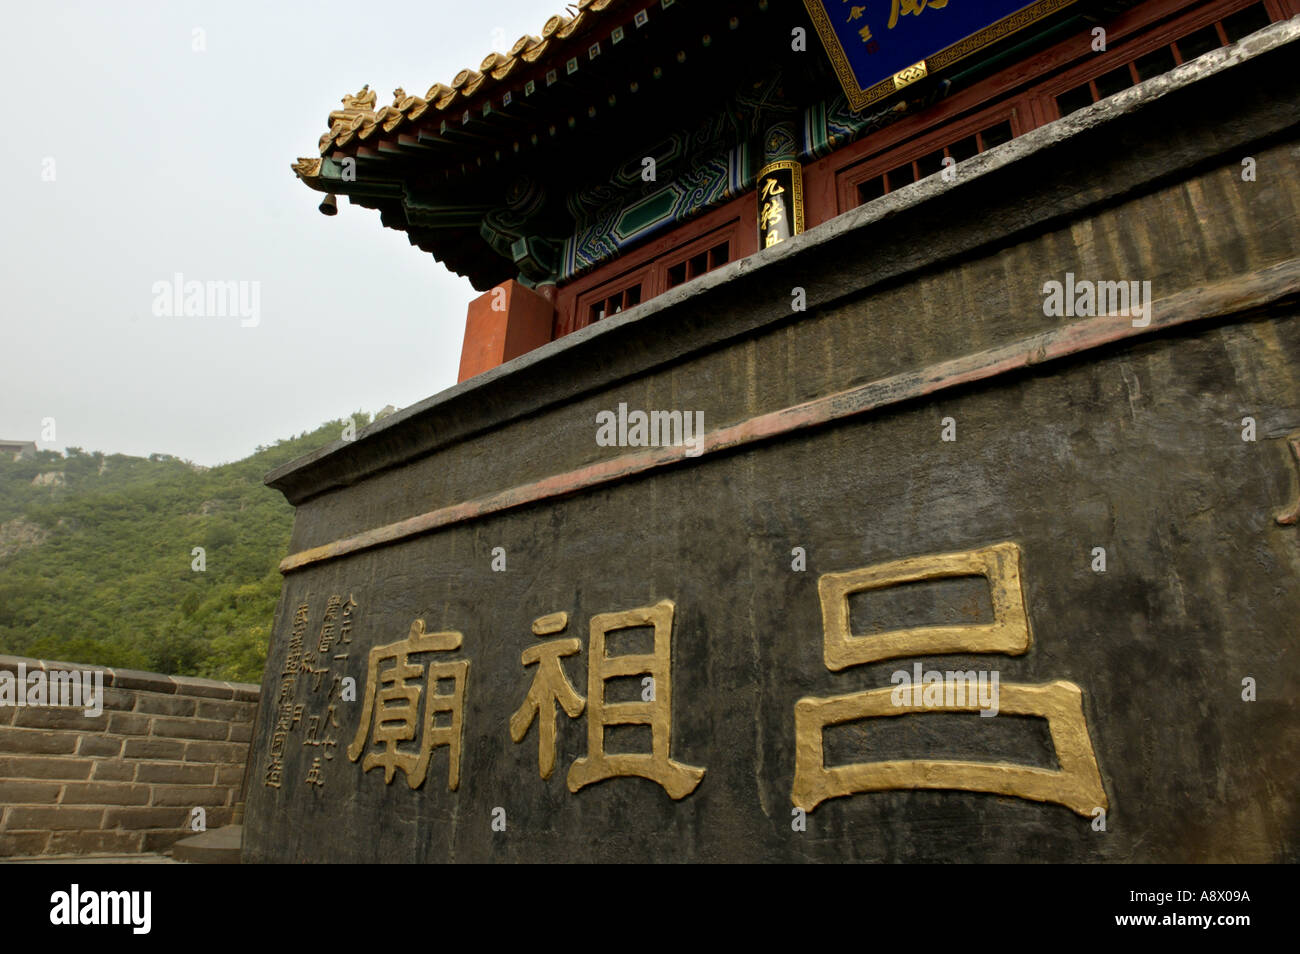 China Beijing A Censer And A Pavilion On The Great Wall At Juyongguan Gate Near Badaling Stock Photo